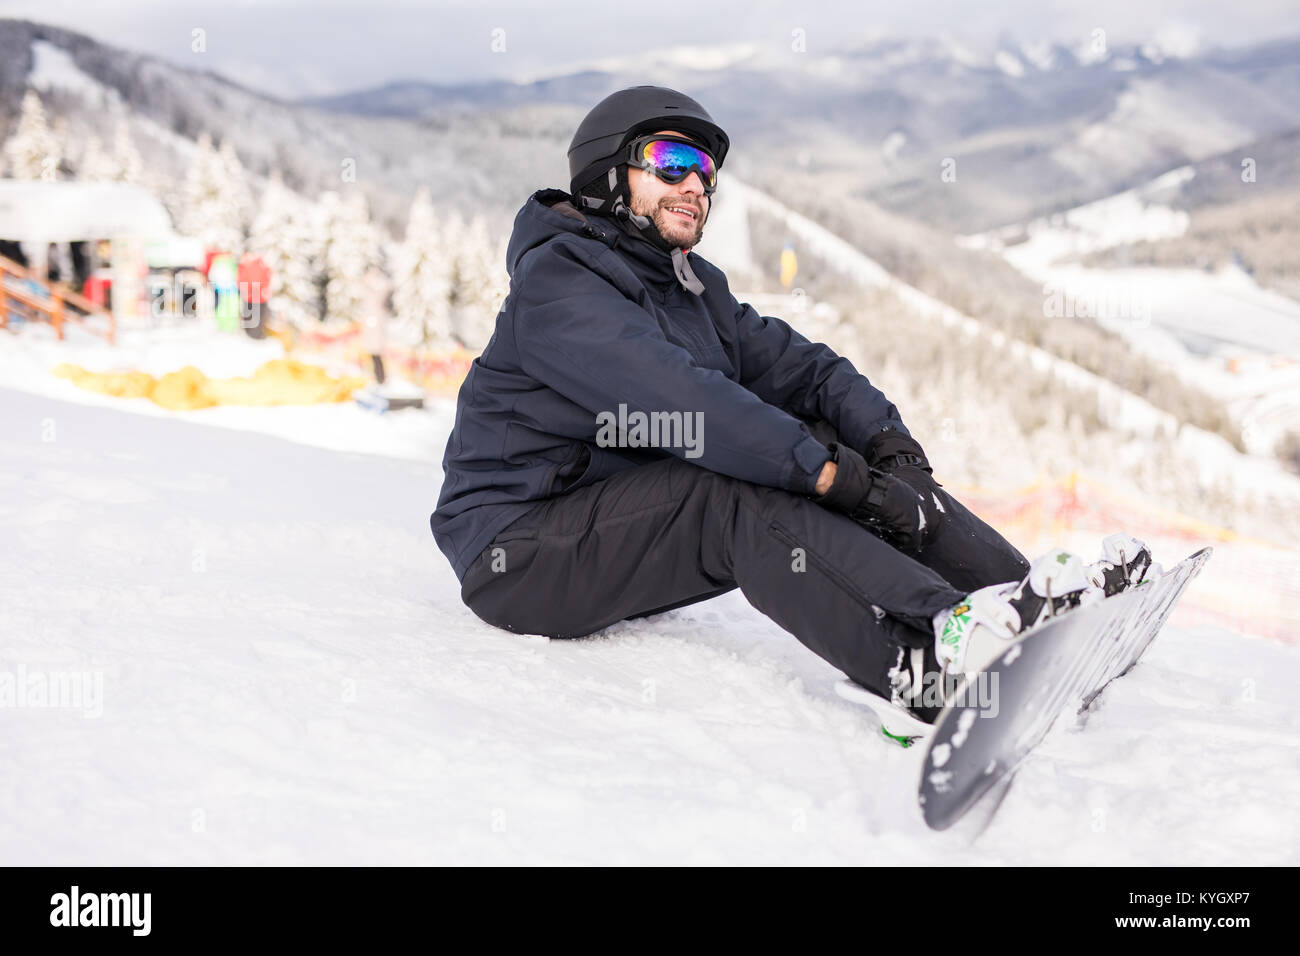 Snowboarder sitting on a ski slope on hill Stock Photo